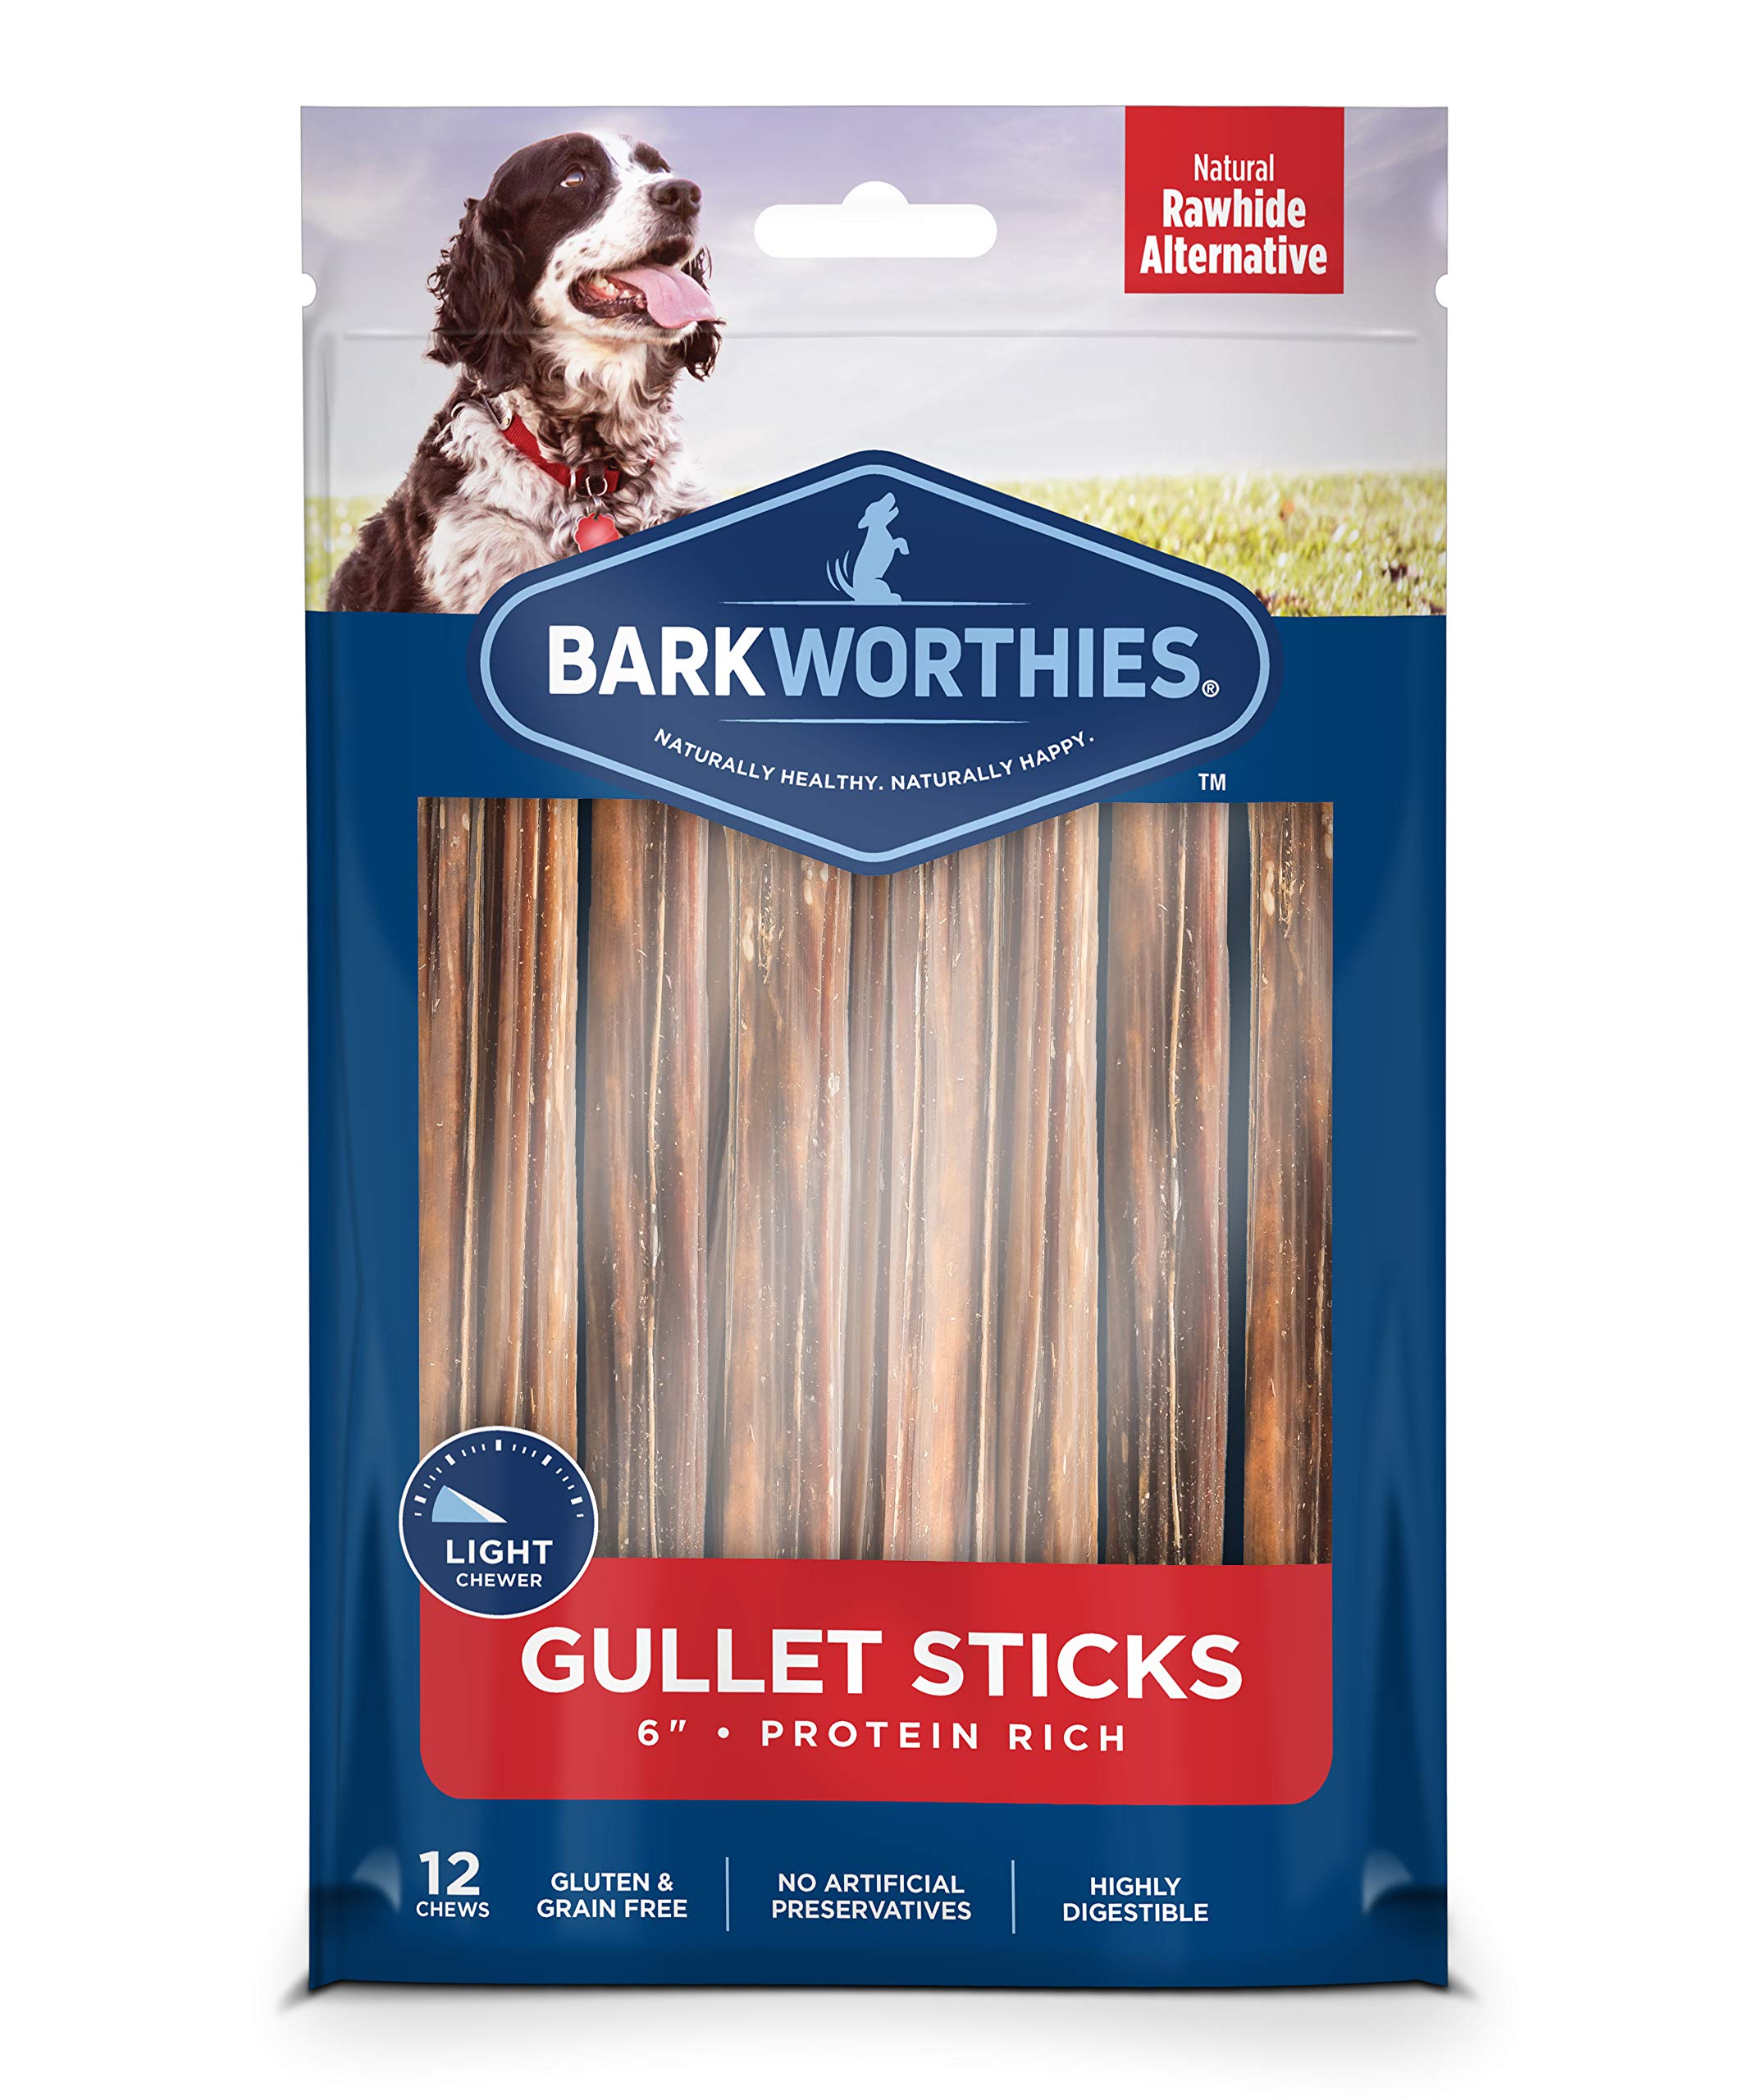 Barkworthies 6-inch Beef Gullet Sticks for Dogs (12 pk) - Healthy Dog